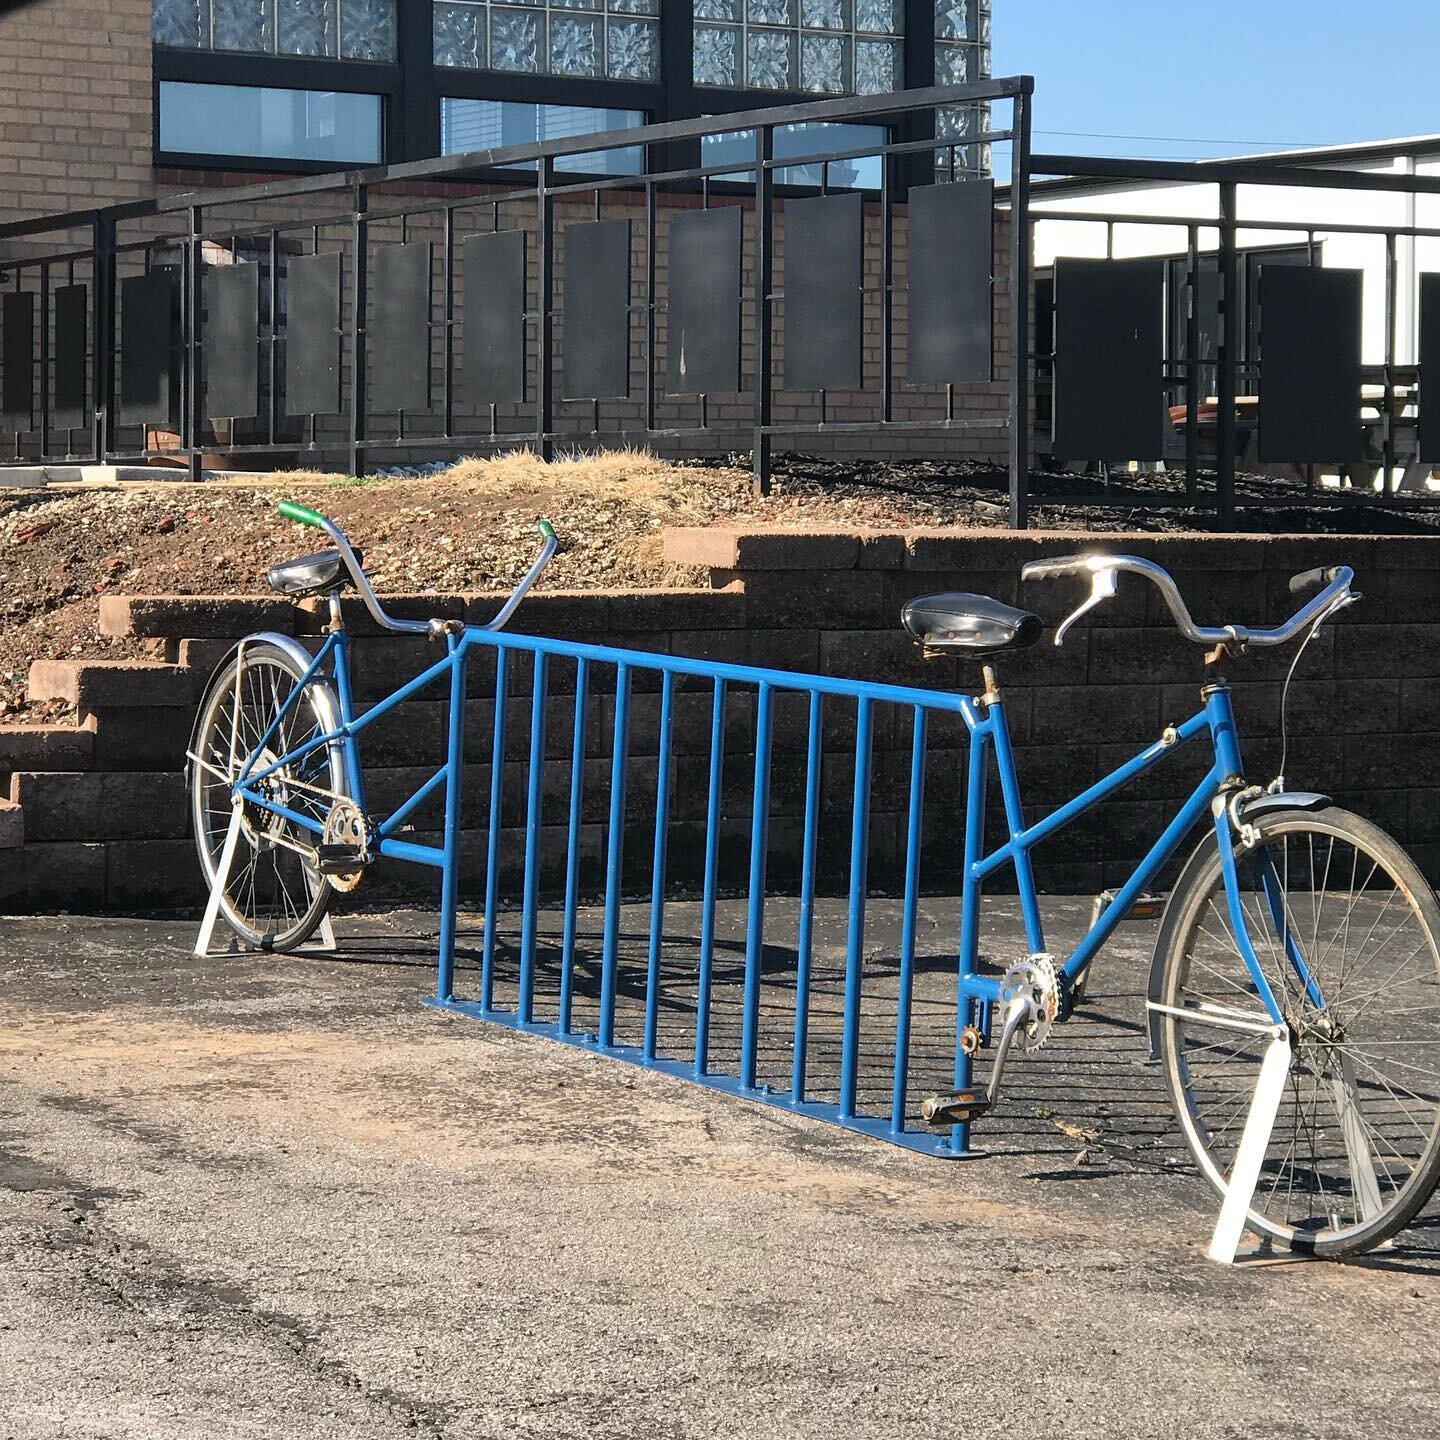 This was a family tandem. Pretty sure our dad did not have plans for Karl to take this out on Friday night to pick up girls. But...plans change. Now it&rsquo;s at Alpha brewery after they made it into a bike rack. Go check out Alpha and tell them Kar